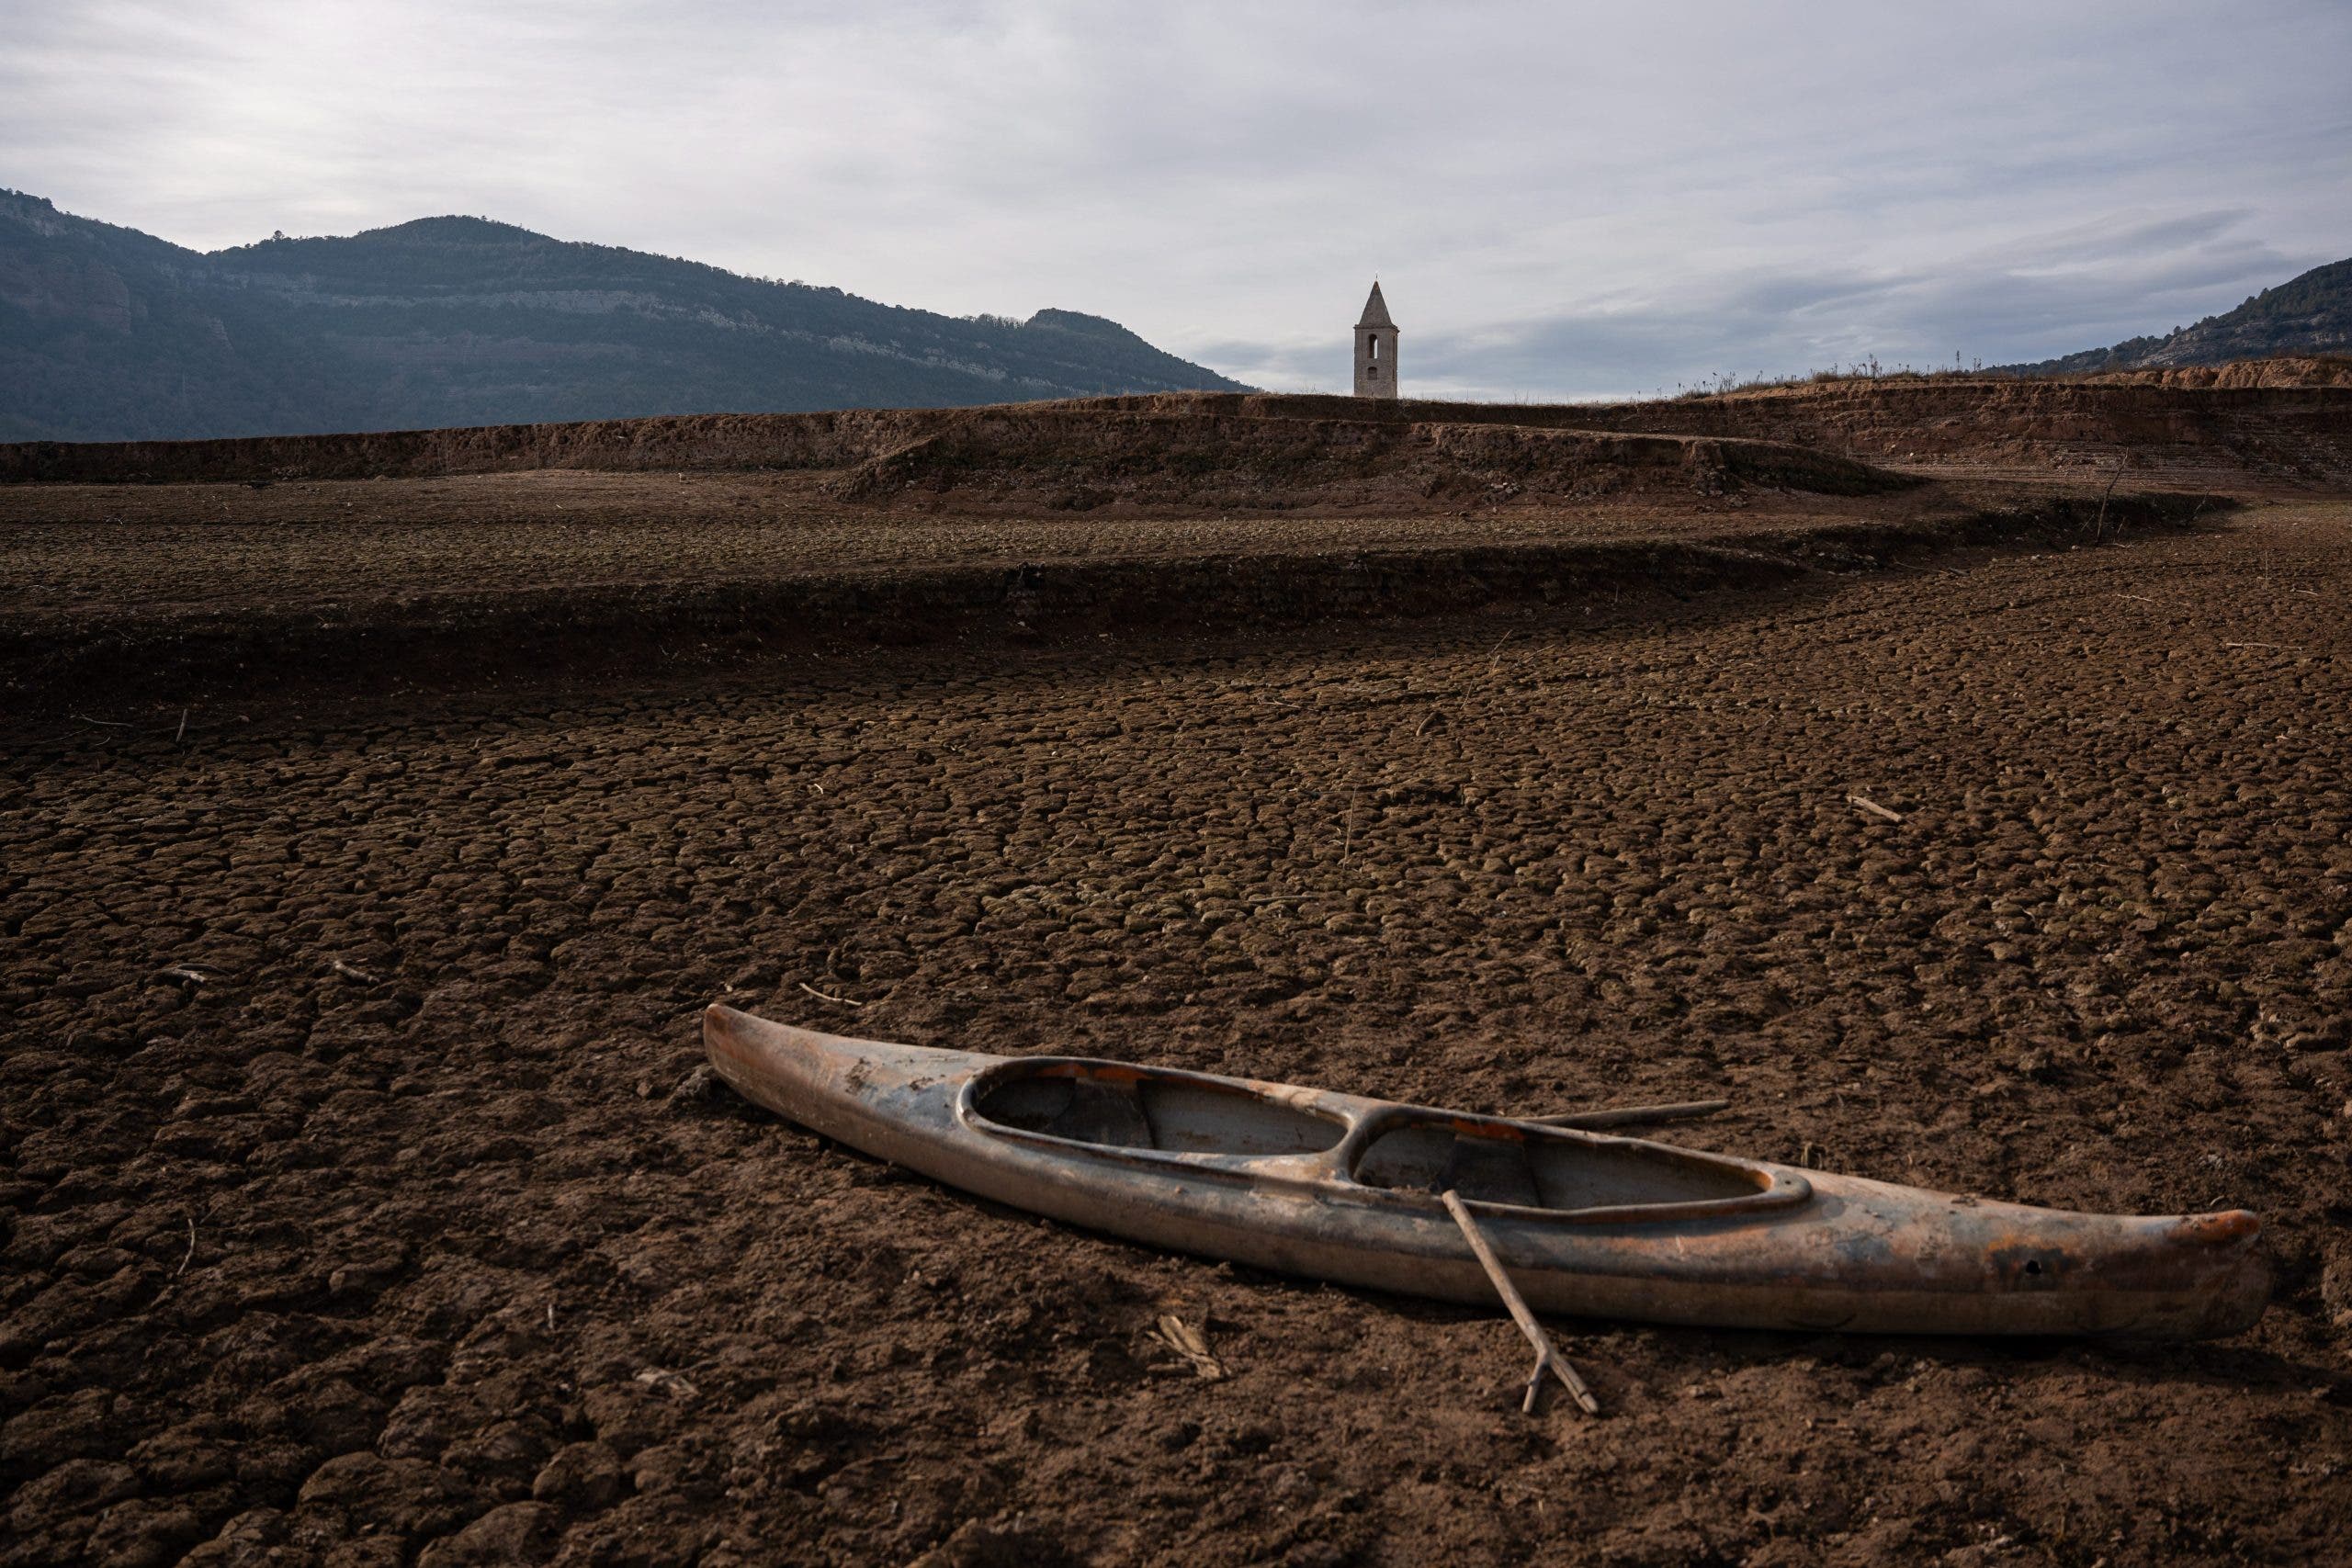 Tourists will face new water restrictions in this region of Spain due to ongoing drought